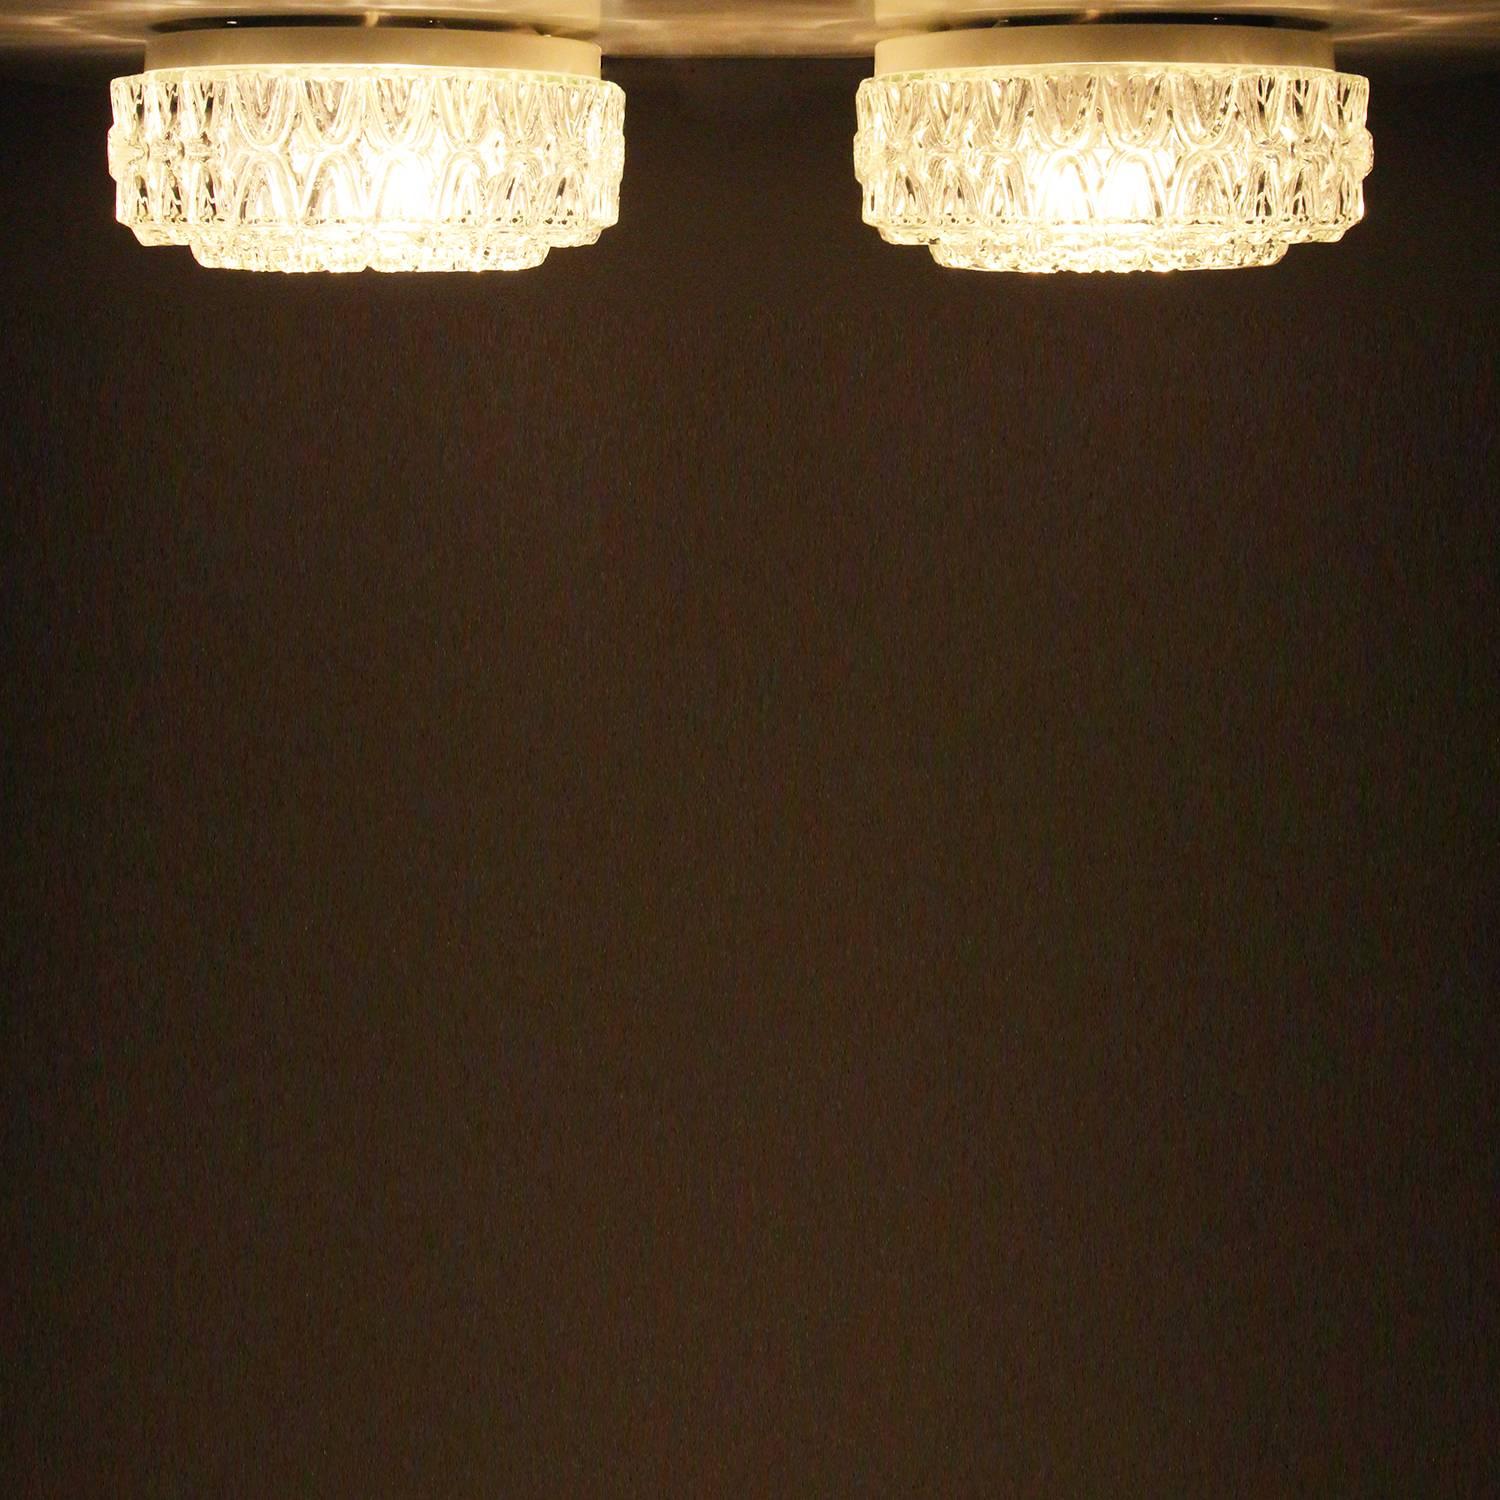 Pressed Glass flush ceiling lights 'pair' by unknown Danish producer, 1960s, beautiful pair of vintage pressed glass flush lights or wall lights with white mounting boxes in very good vintage condition.

Two charming ceiling flush lights, each